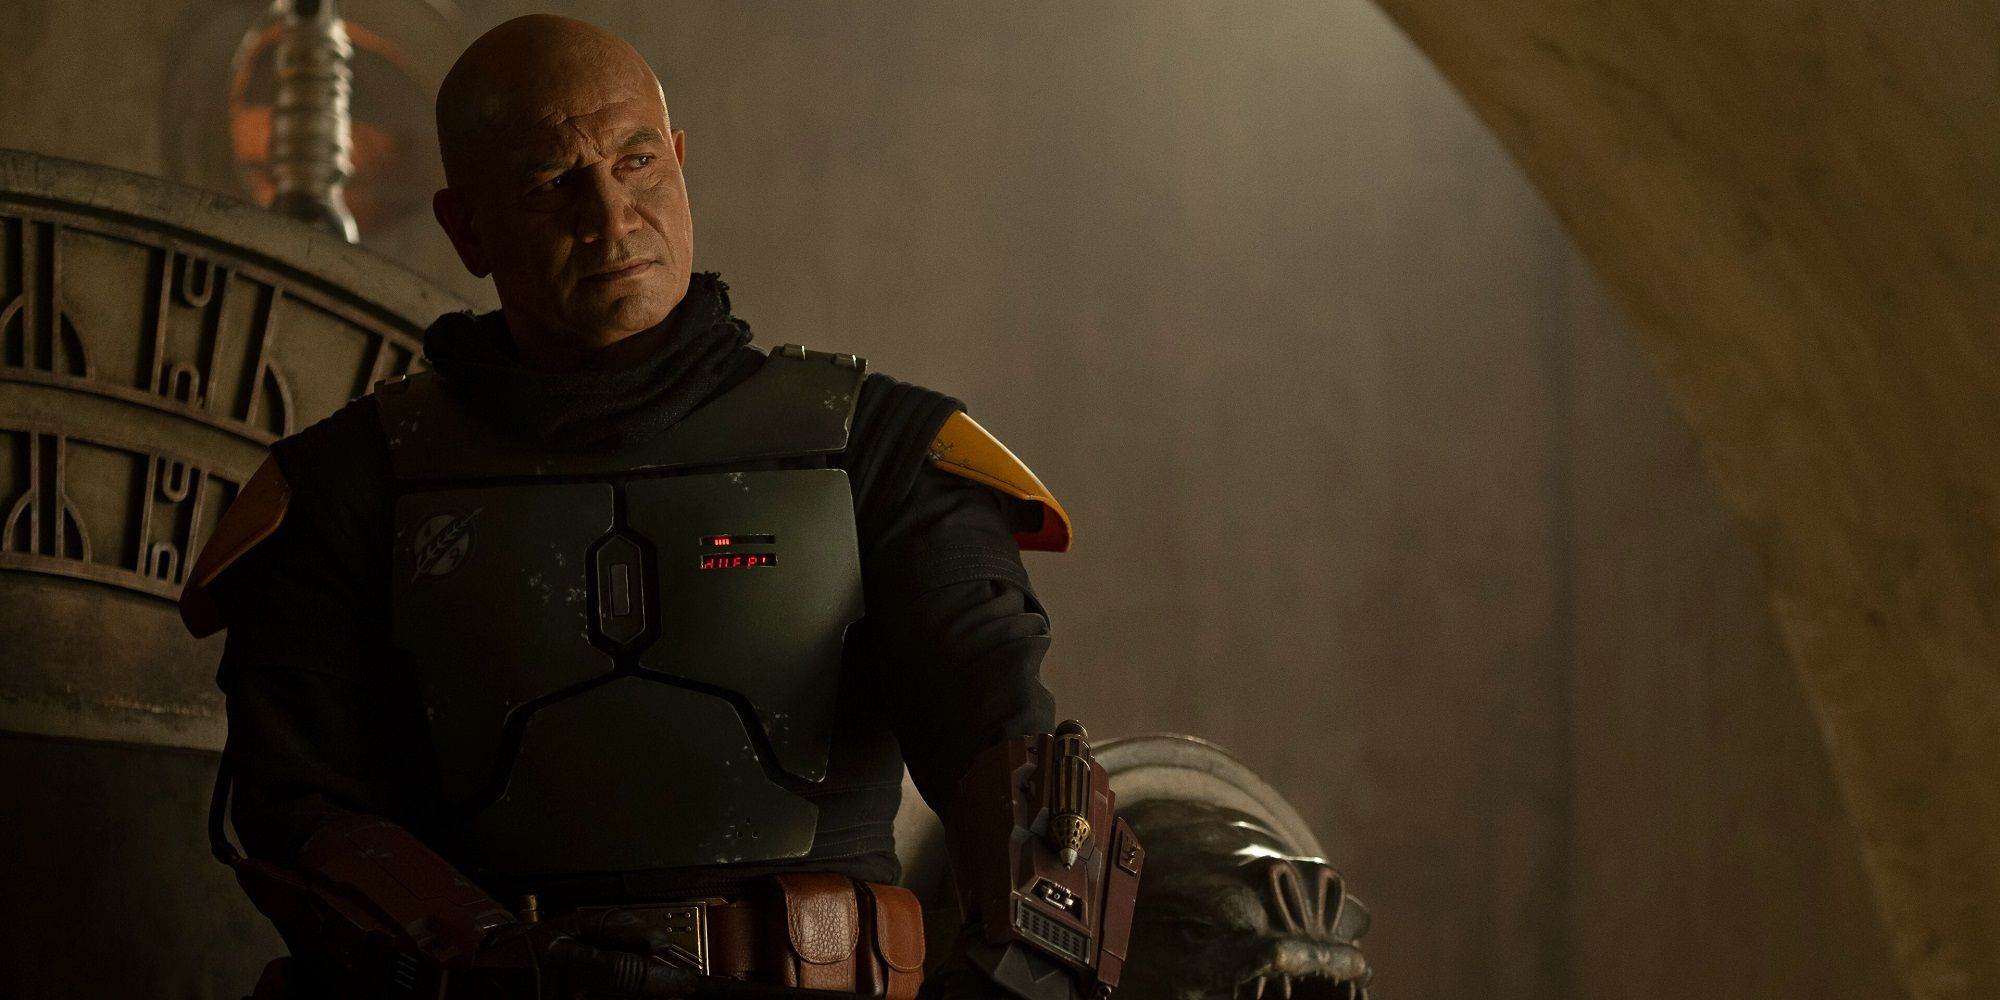 Star Wars actor Temuera Morrison hints at the Boba Fett game